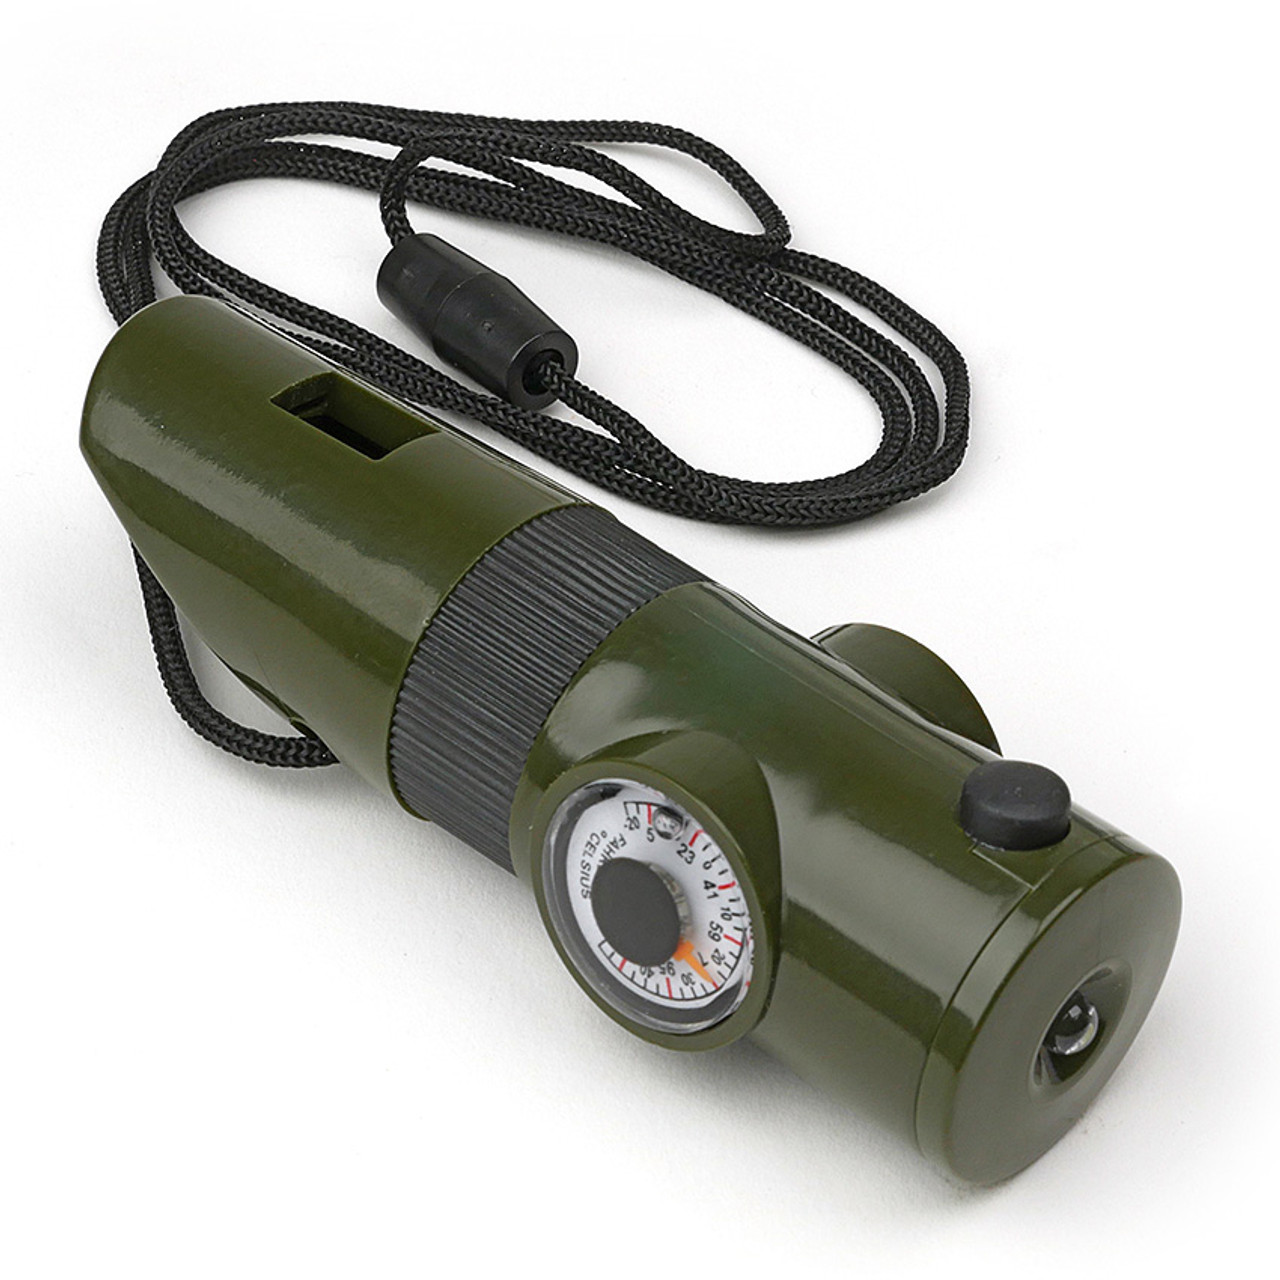 https://cdn11.bigcommerce.com/s-tumf4kk1l4/images/stencil/1280x1280/products/3187/5858/green-7-in-1-survival-whistle-with-led-flashlight-and-compass-24__39650.1640715104.jpg?c=1?imbypass=on